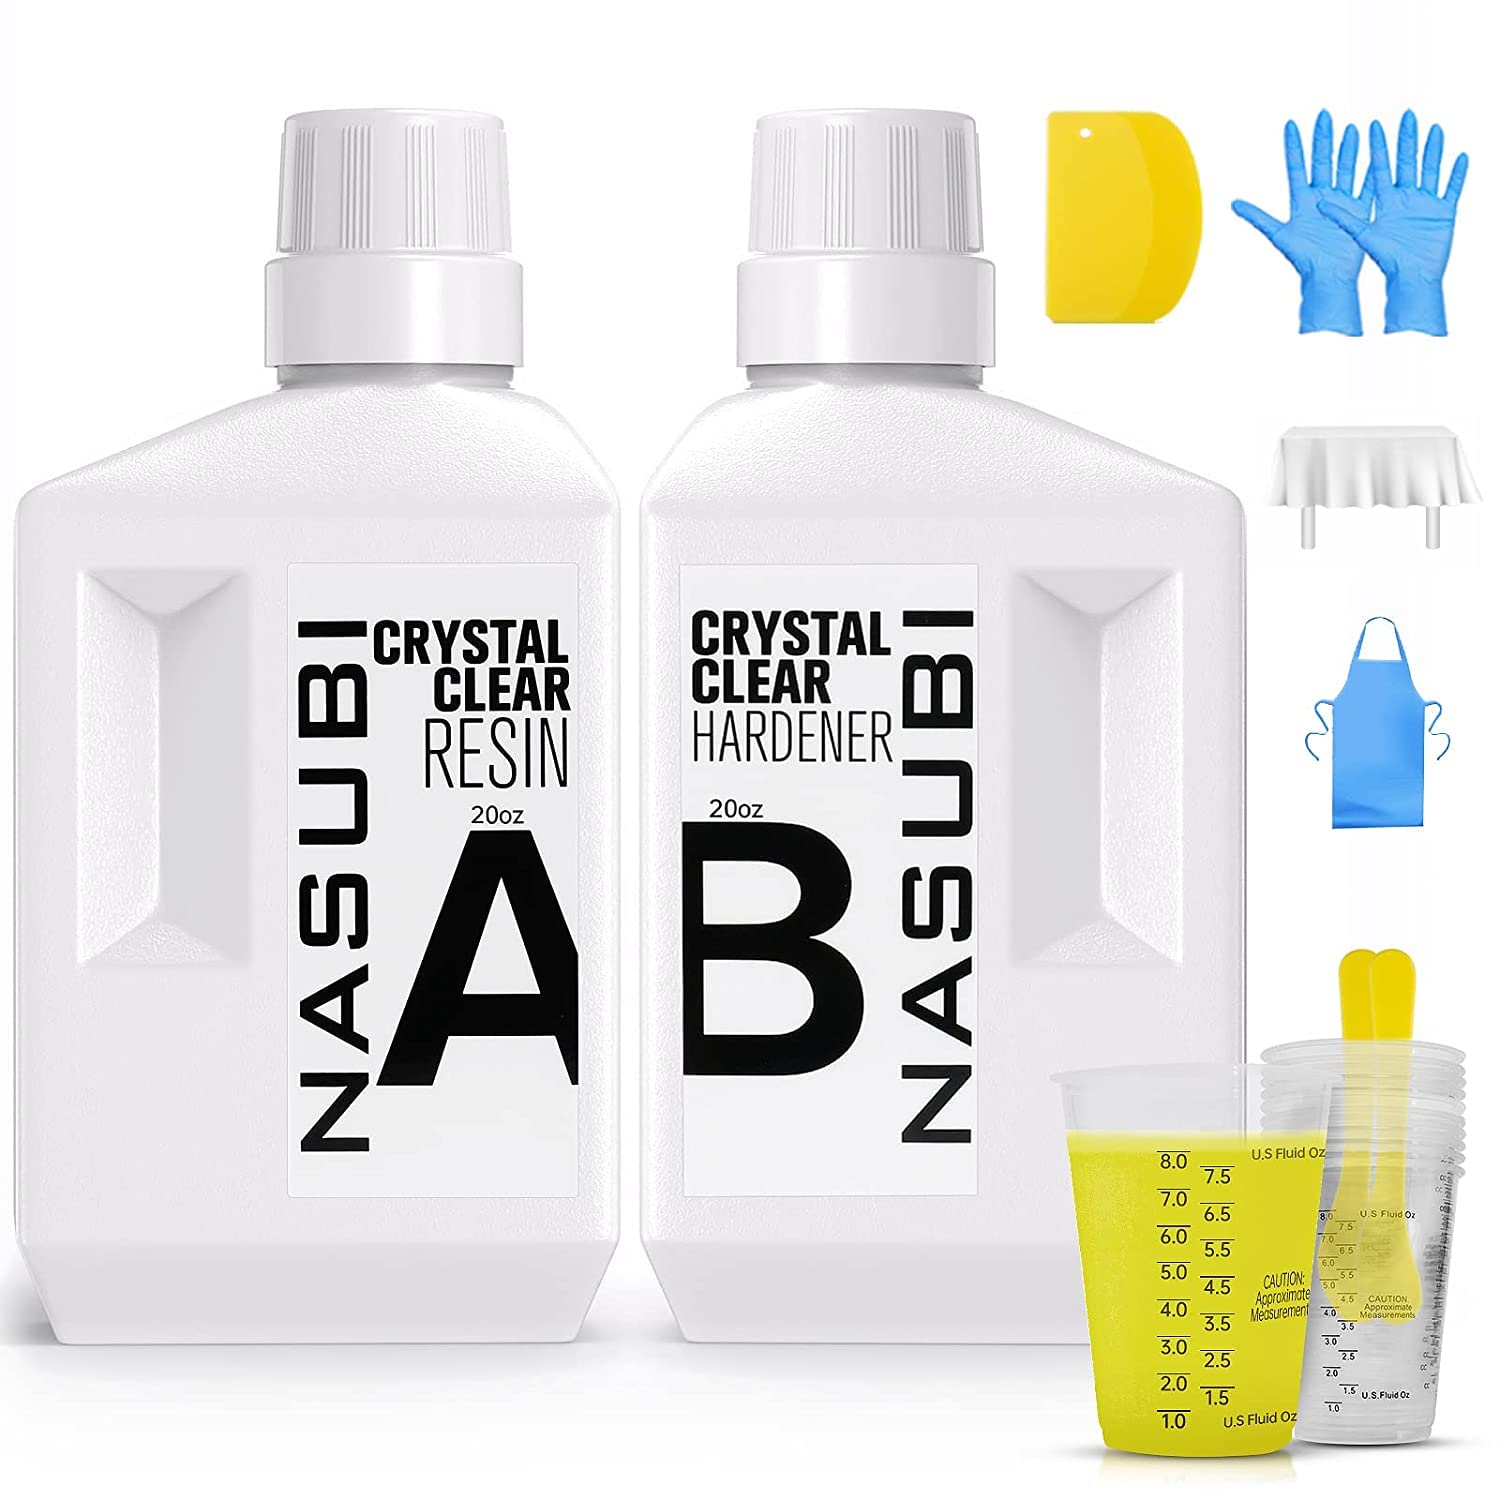 Craft Resin, Crystal Clear Epoxy Resin